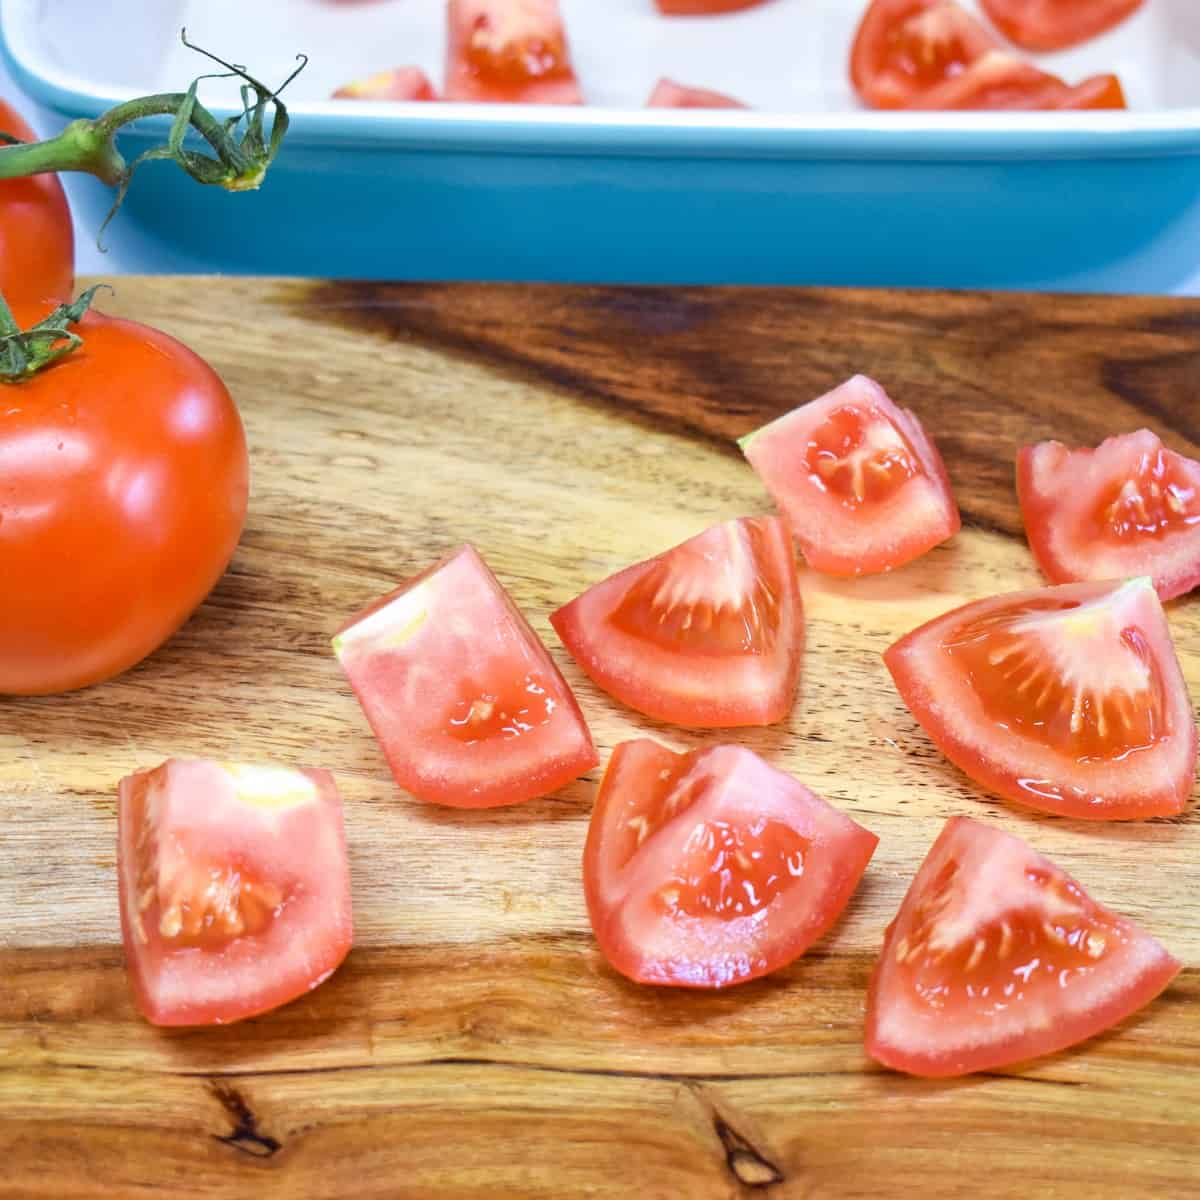 A tomato cut into pieces on a wood cutting board.